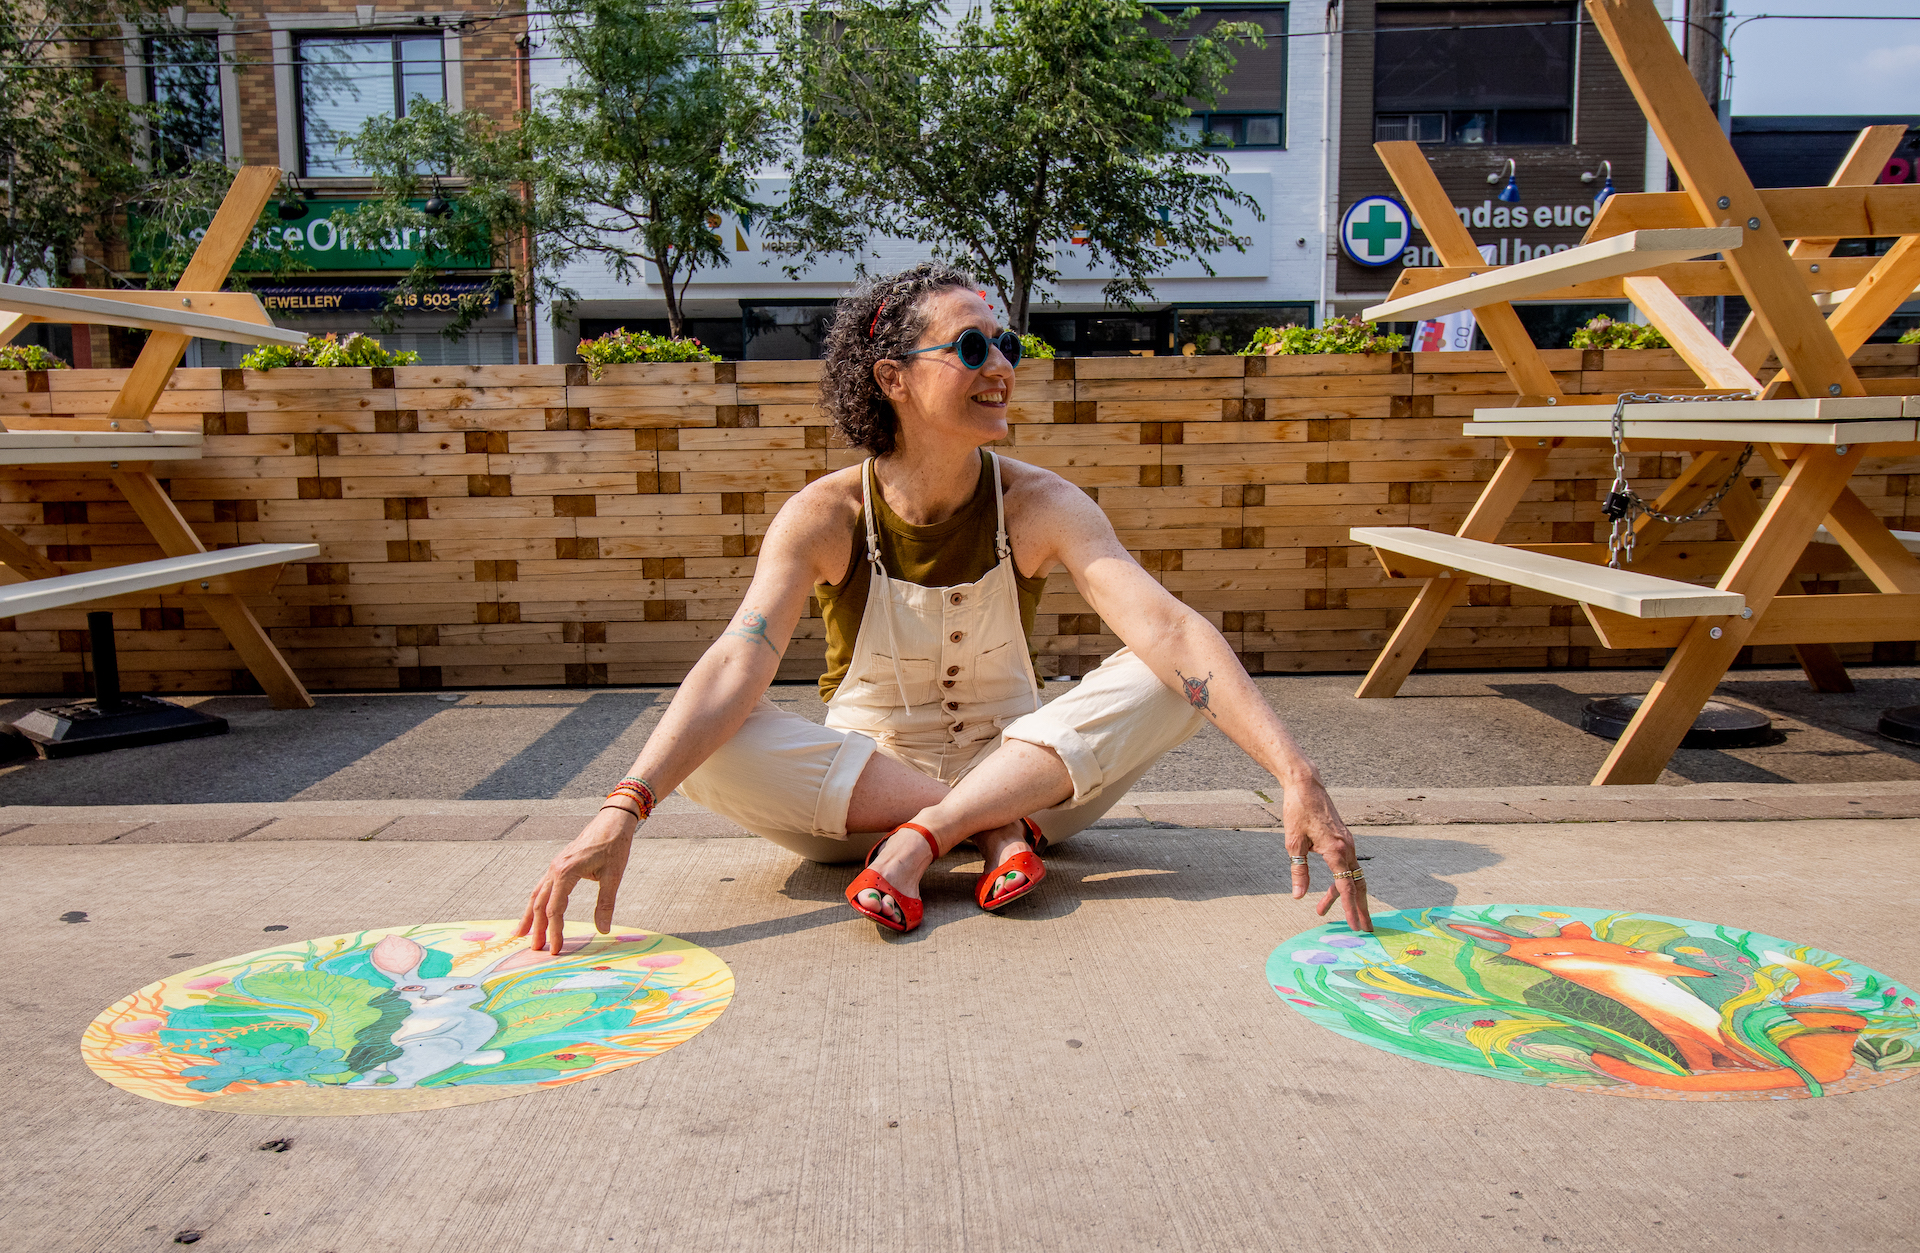 Yaara Eshet sitting on the ground beside large, round sidewalk decals that they designed. The designs have illustrated foxes and rabbits.